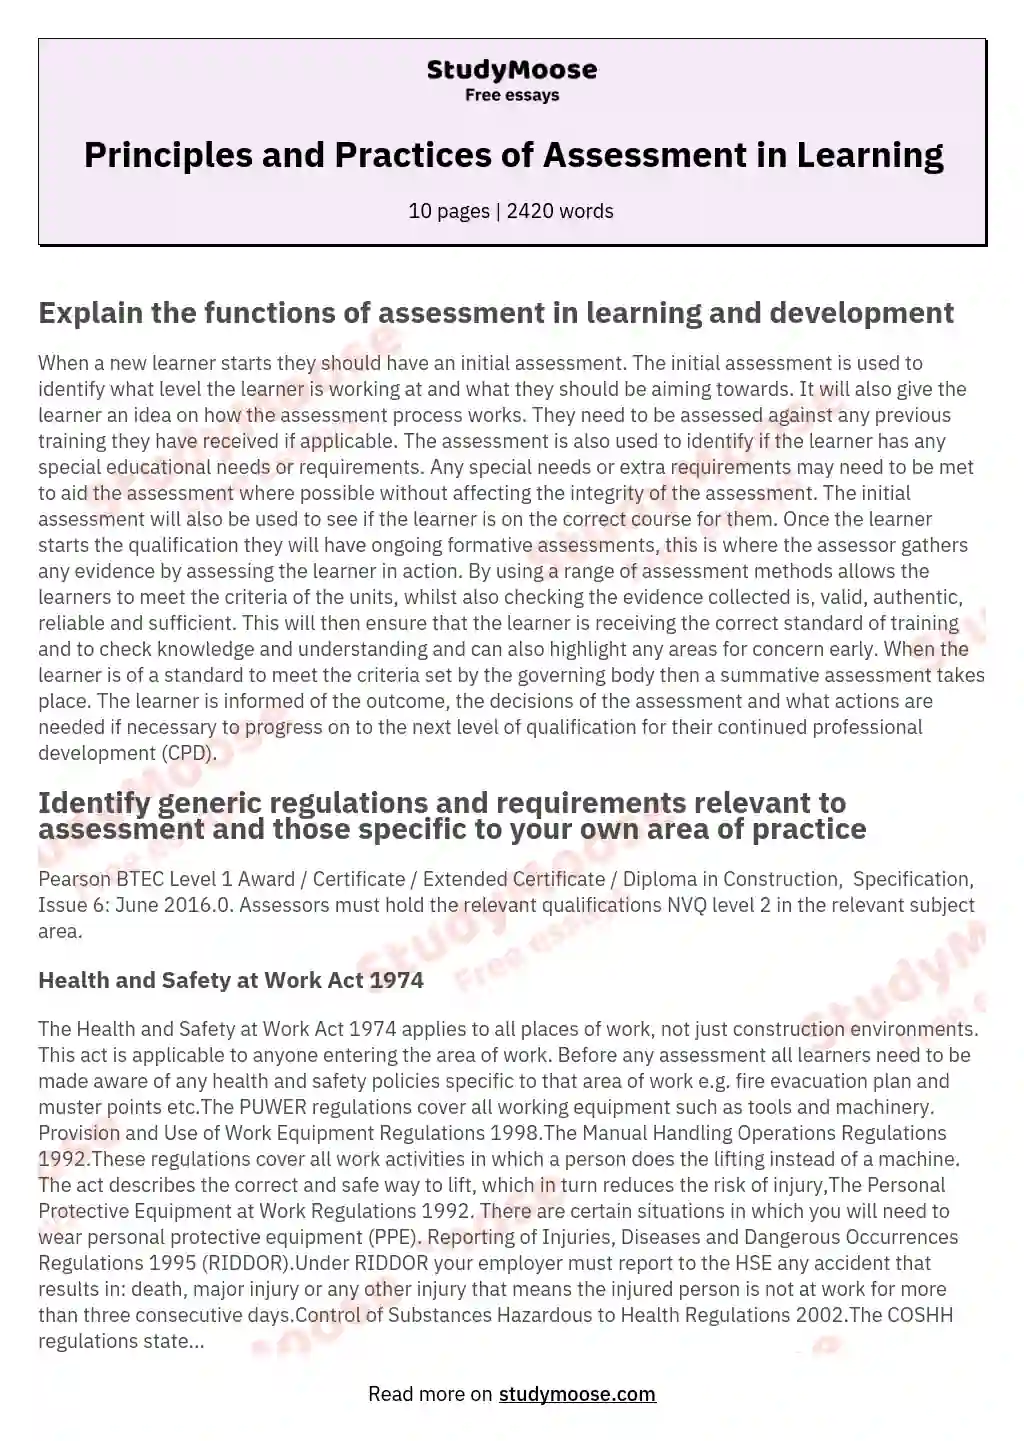 Principles and Practices of Assessment in Learning essay